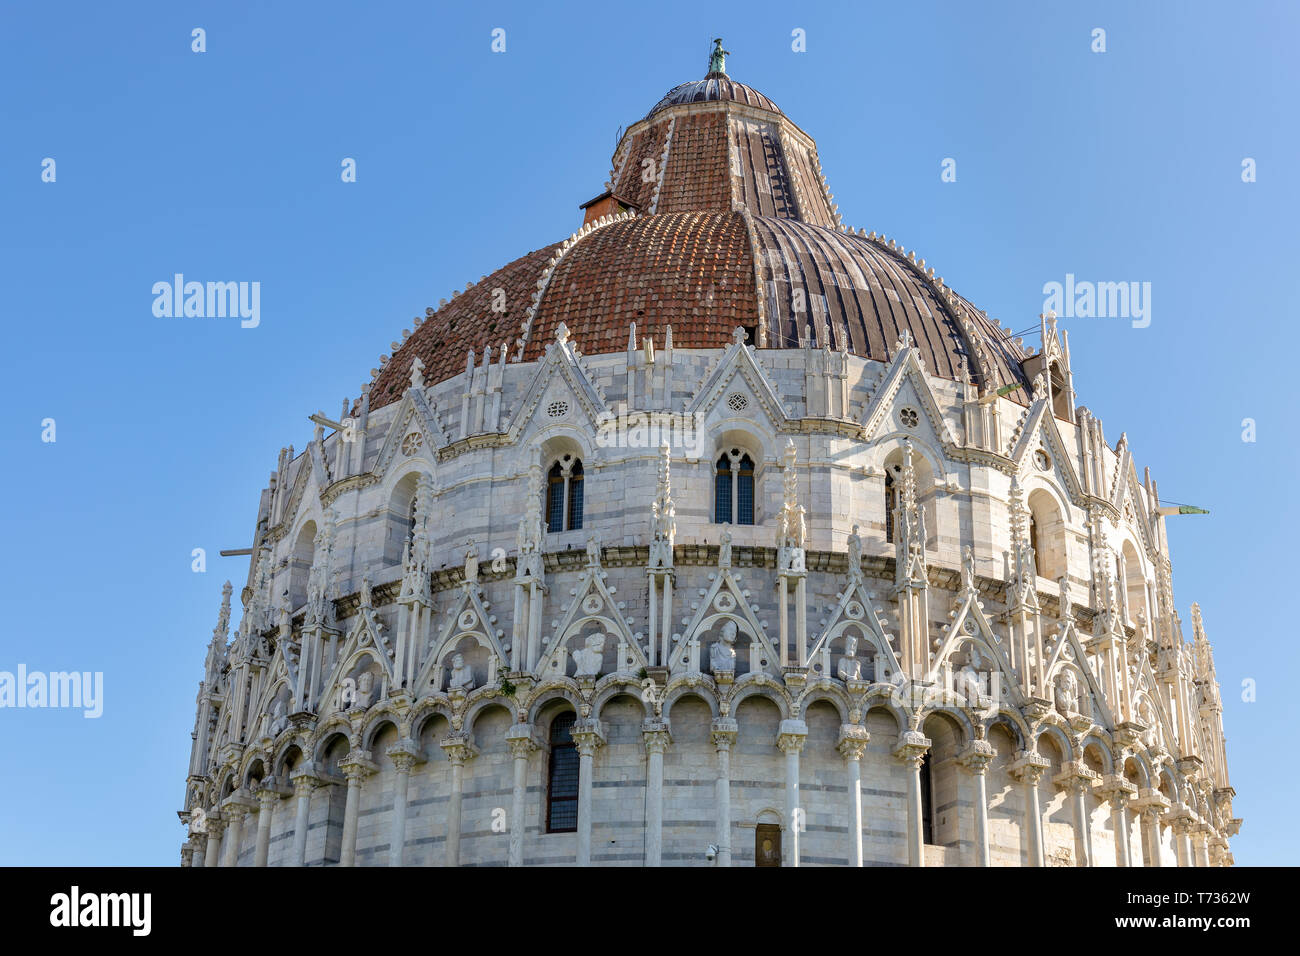 PISA, TUSCANY/ITALY  - APRIL 18 : Exterior view of the Baptistery in Pisa Tuscany Italy on April 18, 2019 Stock Photo